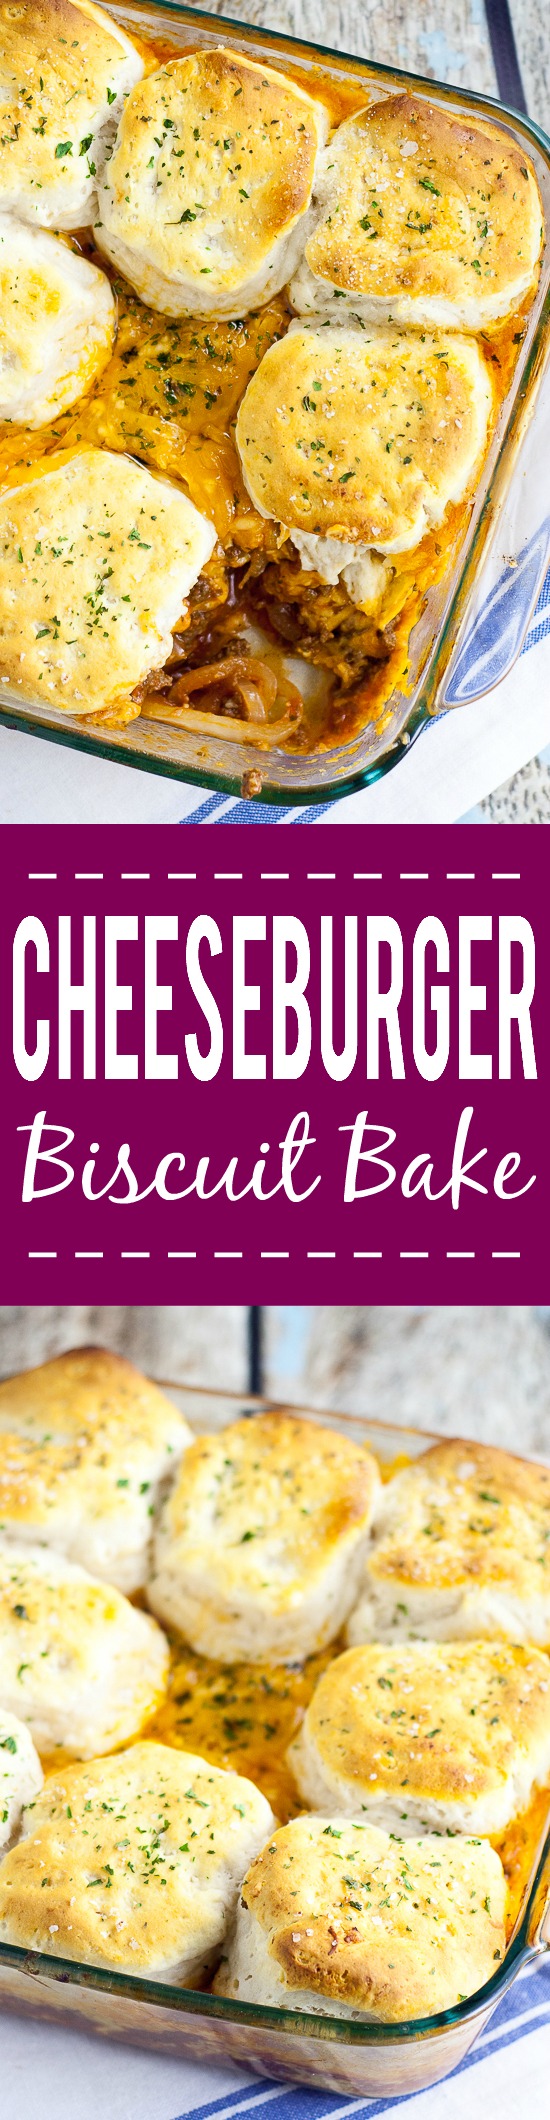 Cheeseburger Biscuit Bake Recipe - This Cheeseburger Biscuit Bake recipe is a delicious 30 minute recipe with ground beef and lots of cheese that's sure to be an instant family favorite. Super yummy and EASY family dinner recipe. 